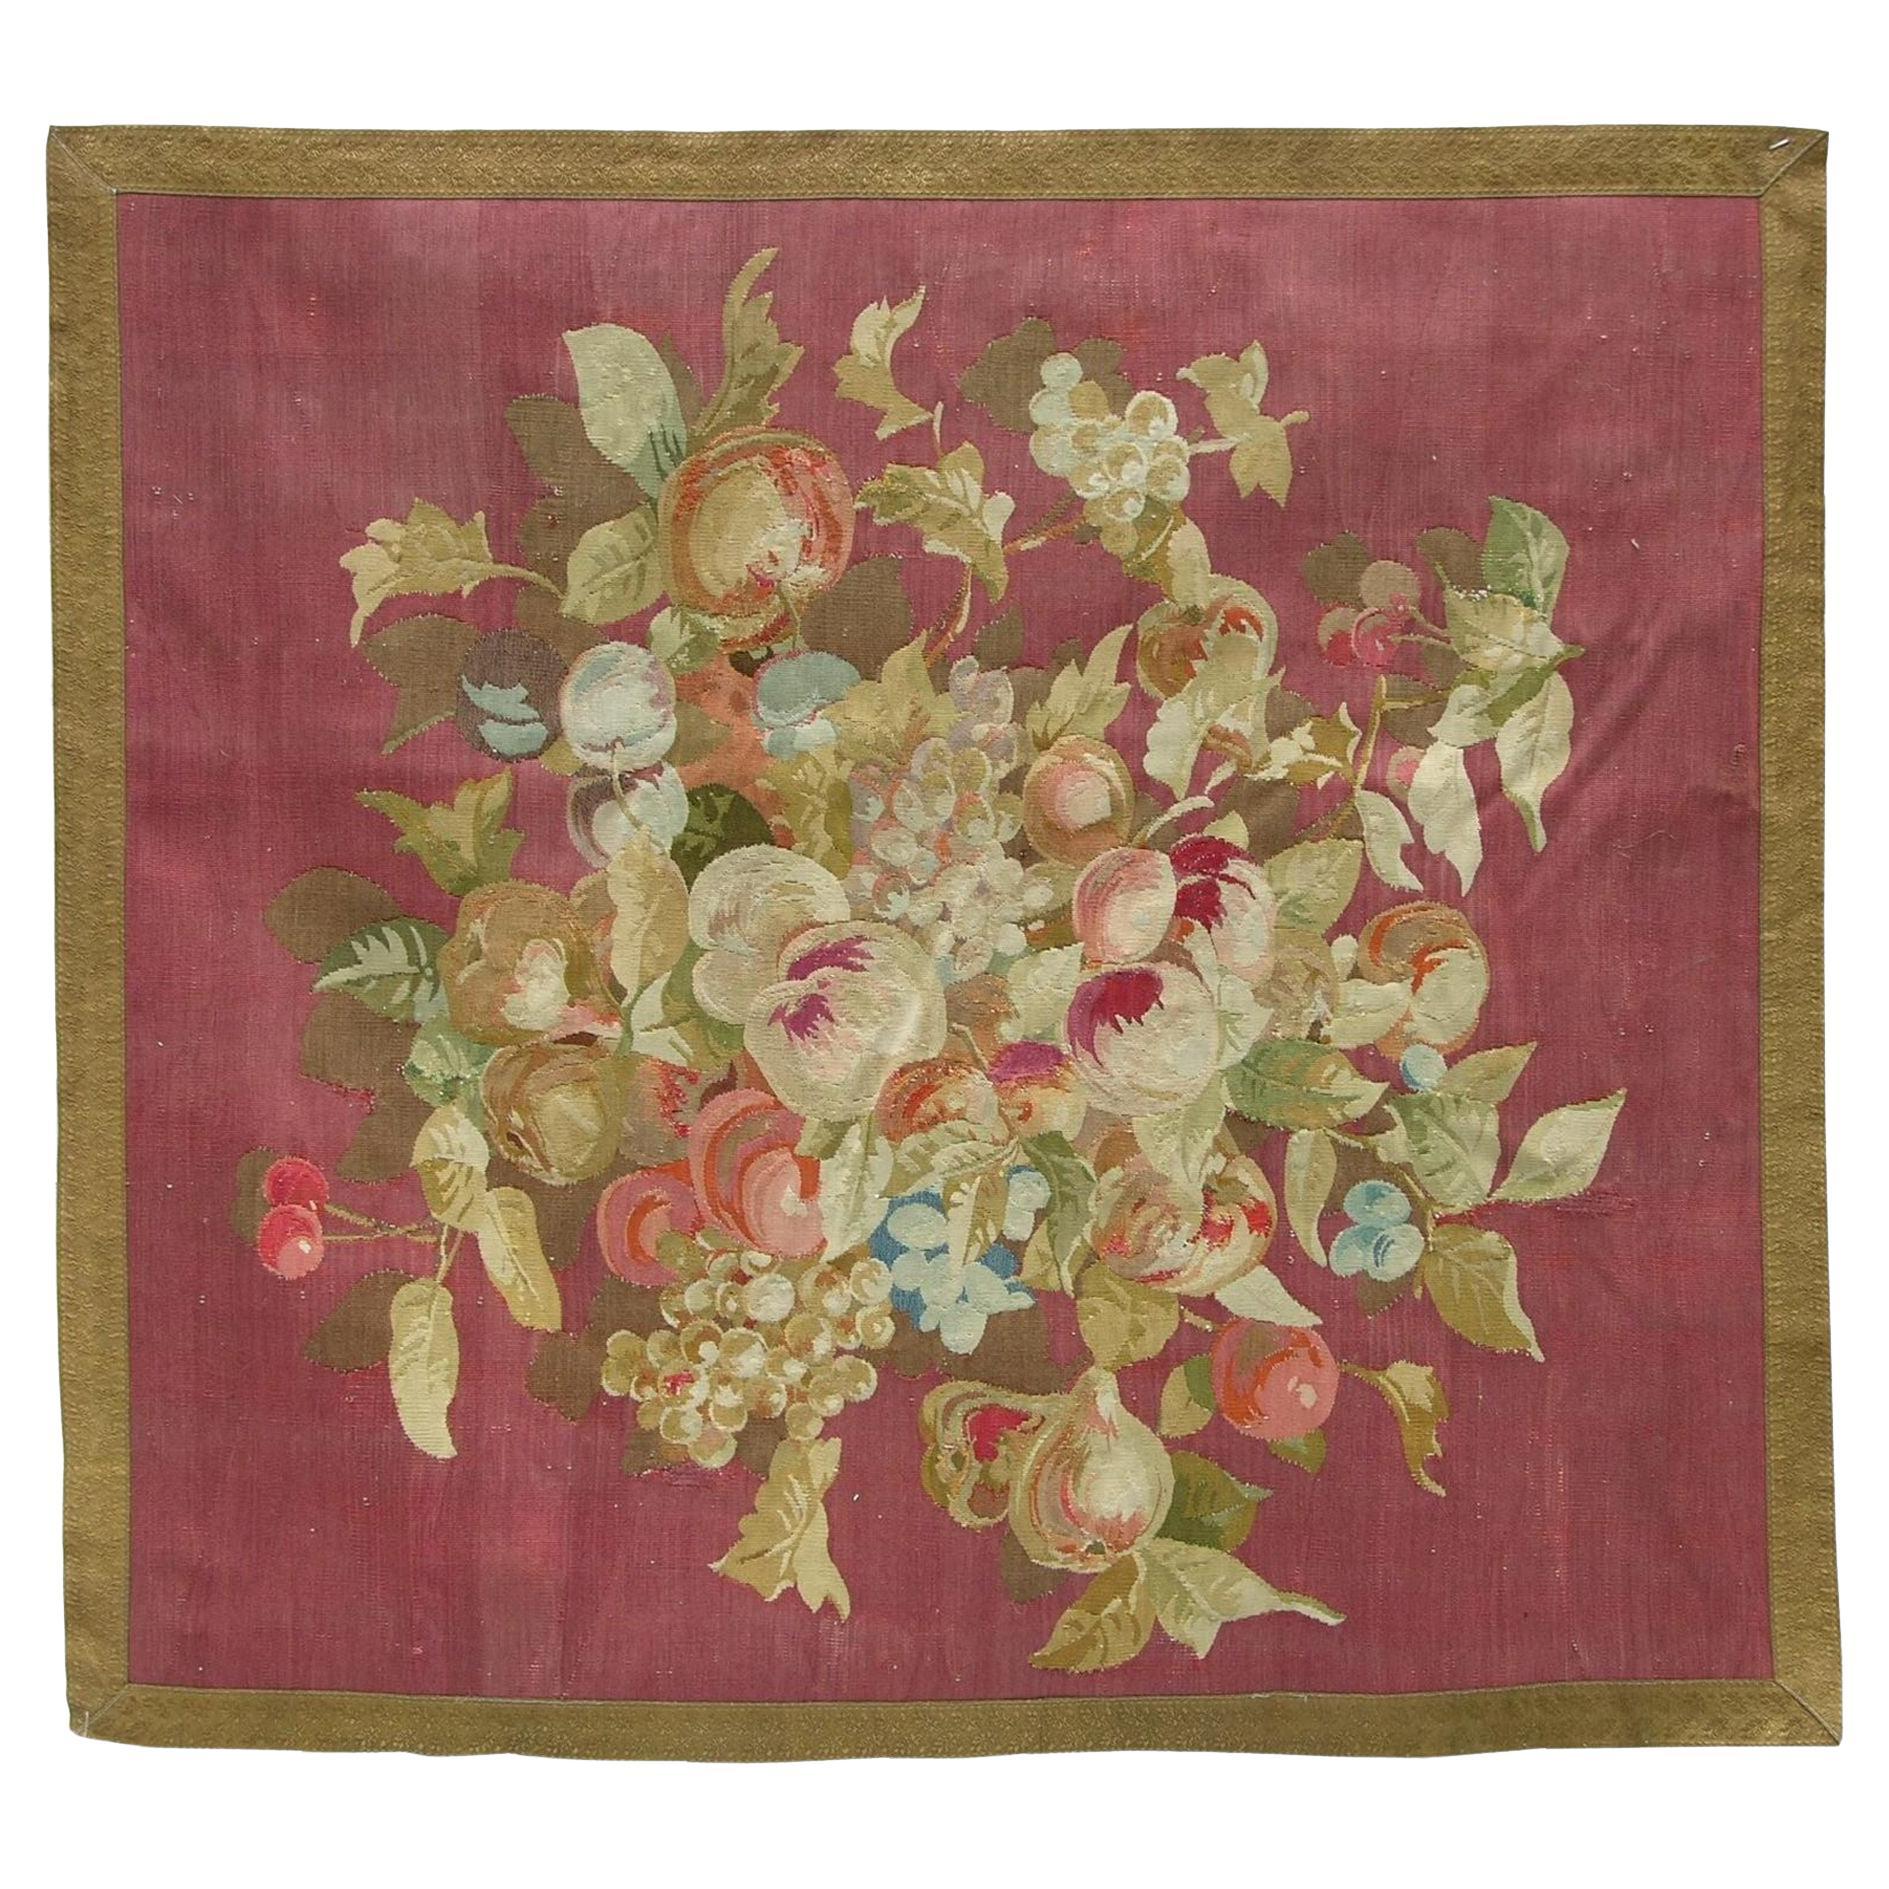 Antique 1850 Aubusson French Tapestry 3'3" X 3' For Sale